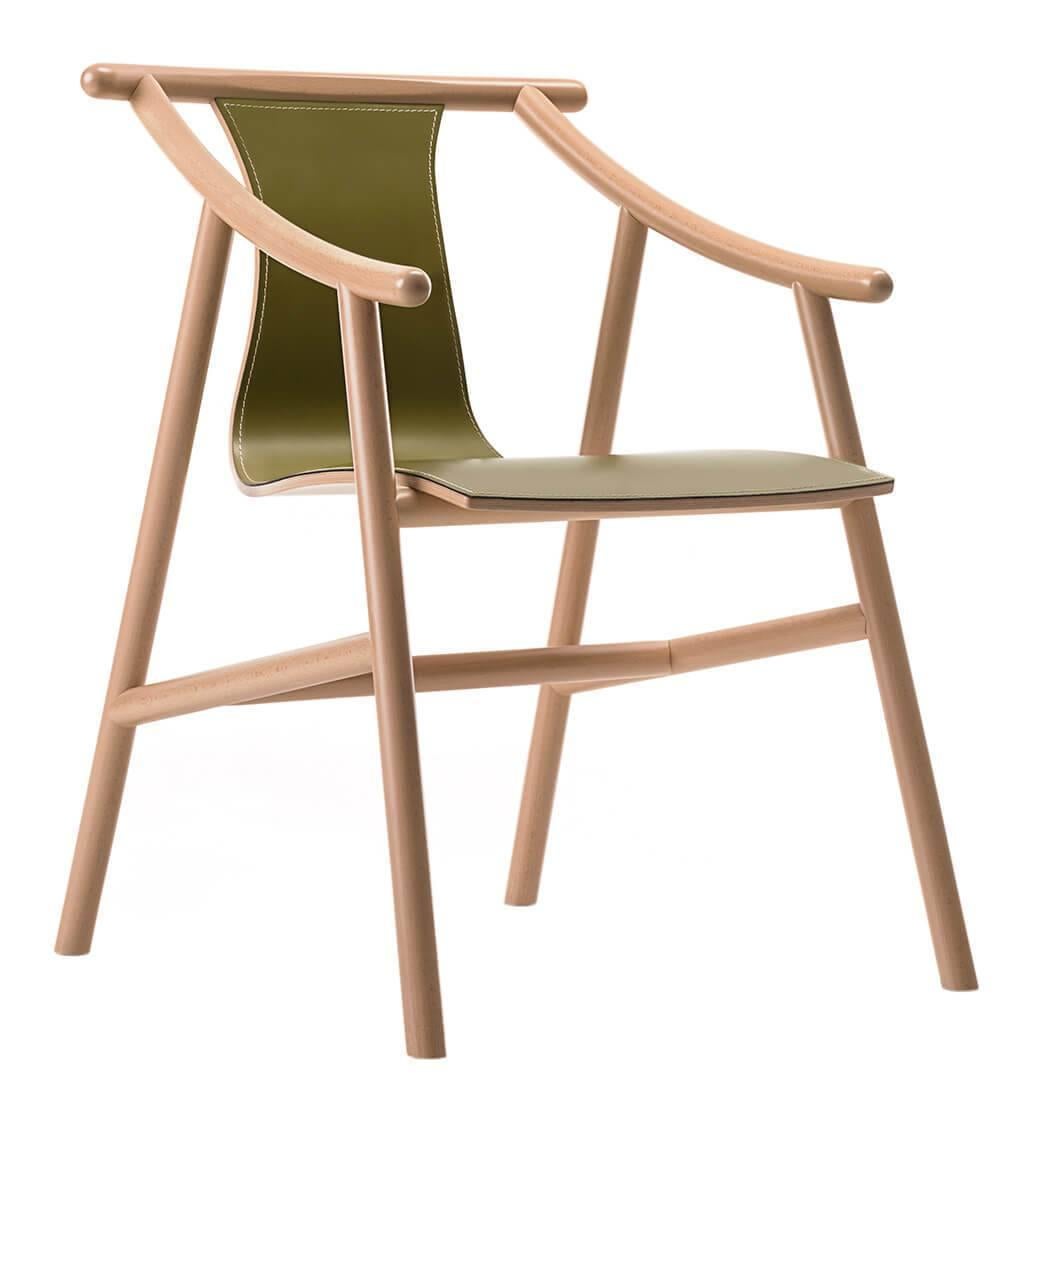 Designed by Vico Magistretti in 2003, the Magistretti 03 01 chair combines the warmth of wood and the timeless elegance of the design language of Gebrüder Thonet Vienna GmbH (GTV) with the refined style of the great master, one of the leading